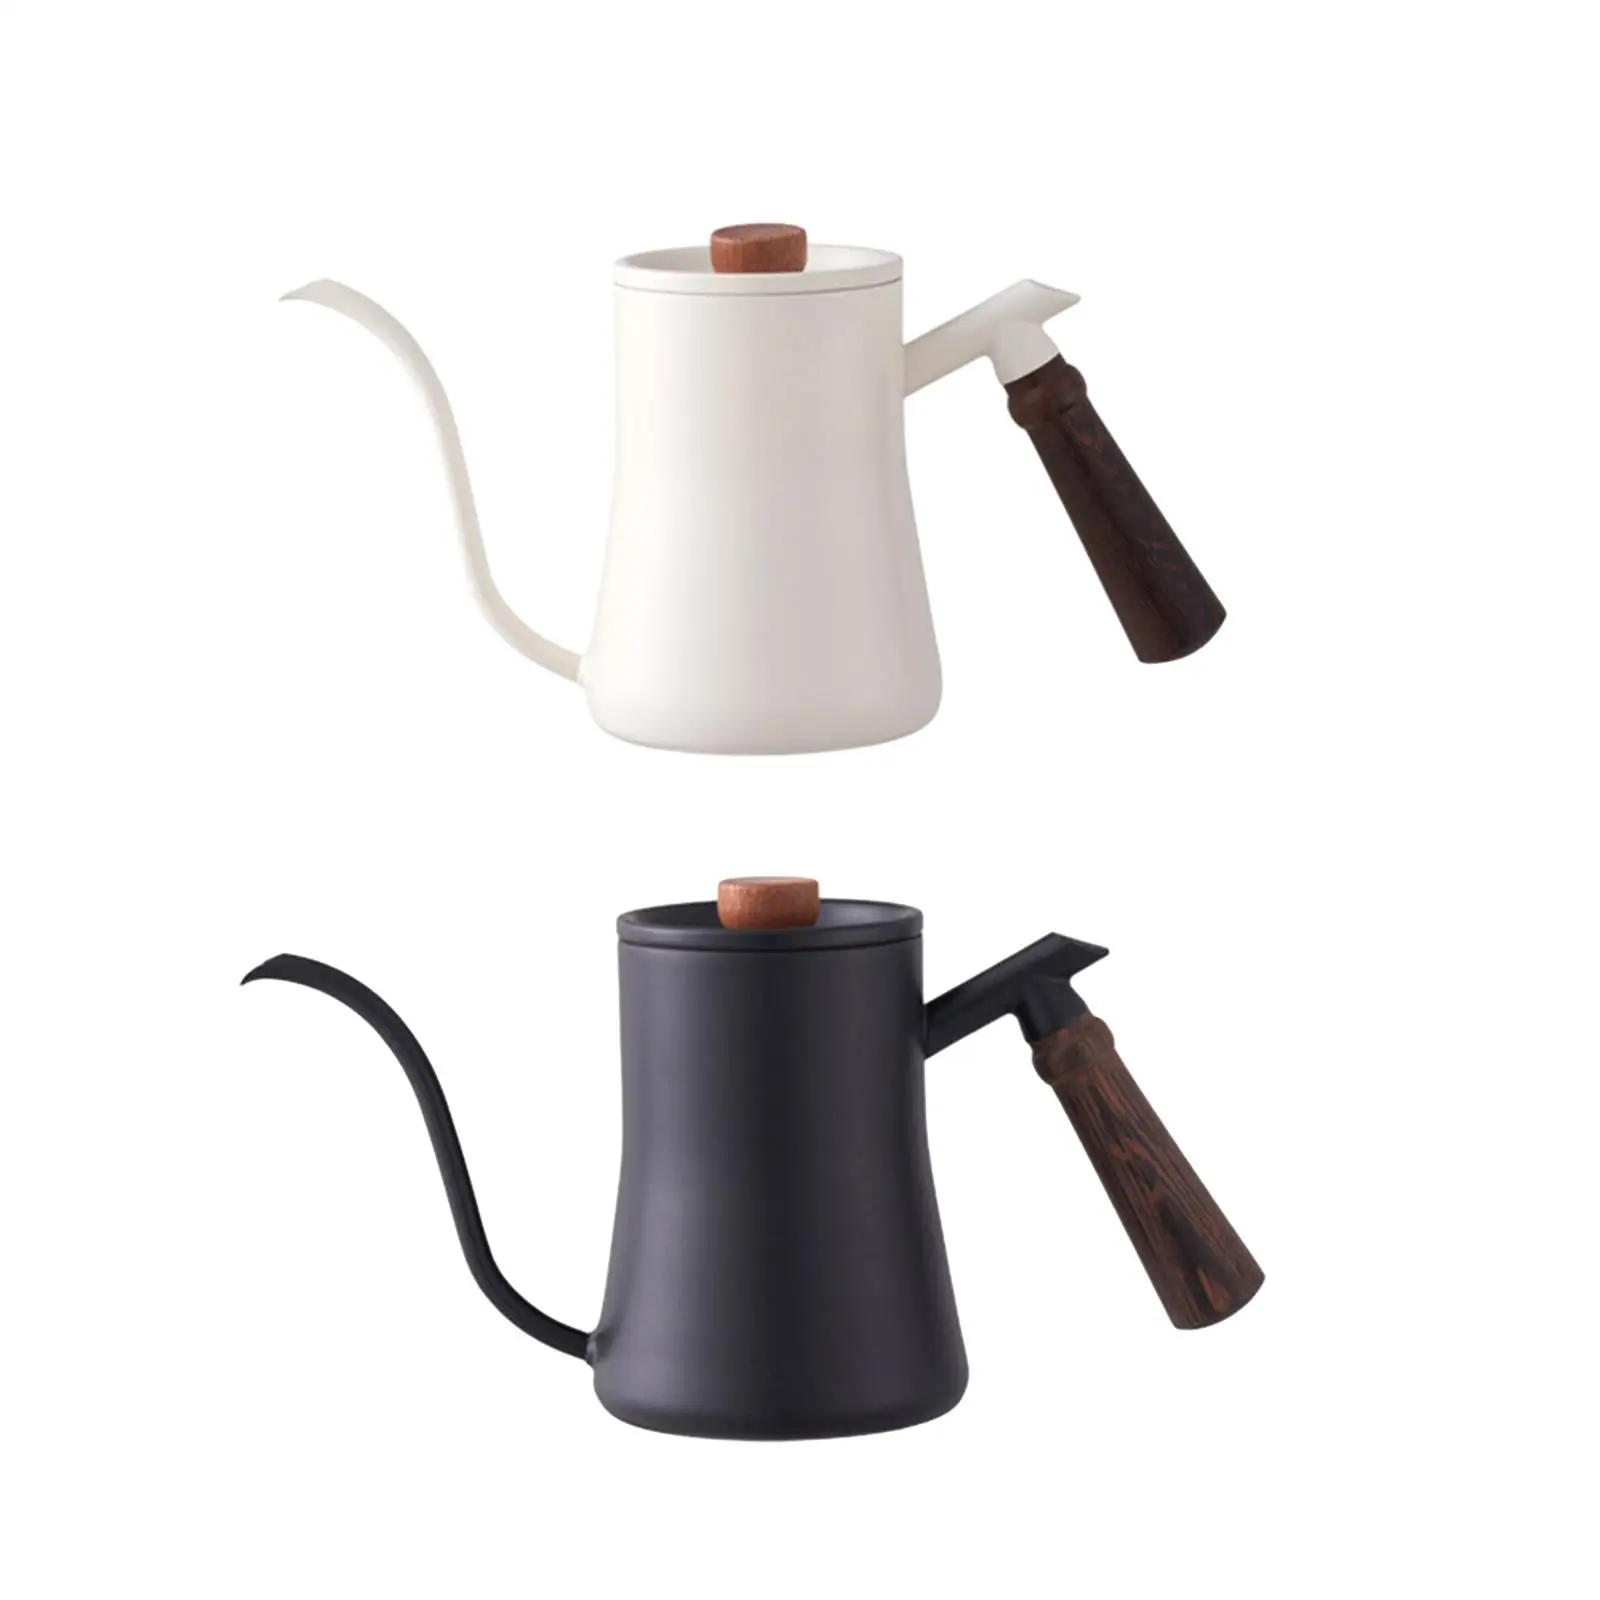 0.6 L Pour over Coffee Kettle Flow Spout Professional Durable Tea Pot Teakettle for Picnic Camping Cafe Barista Gift Cafe Bar